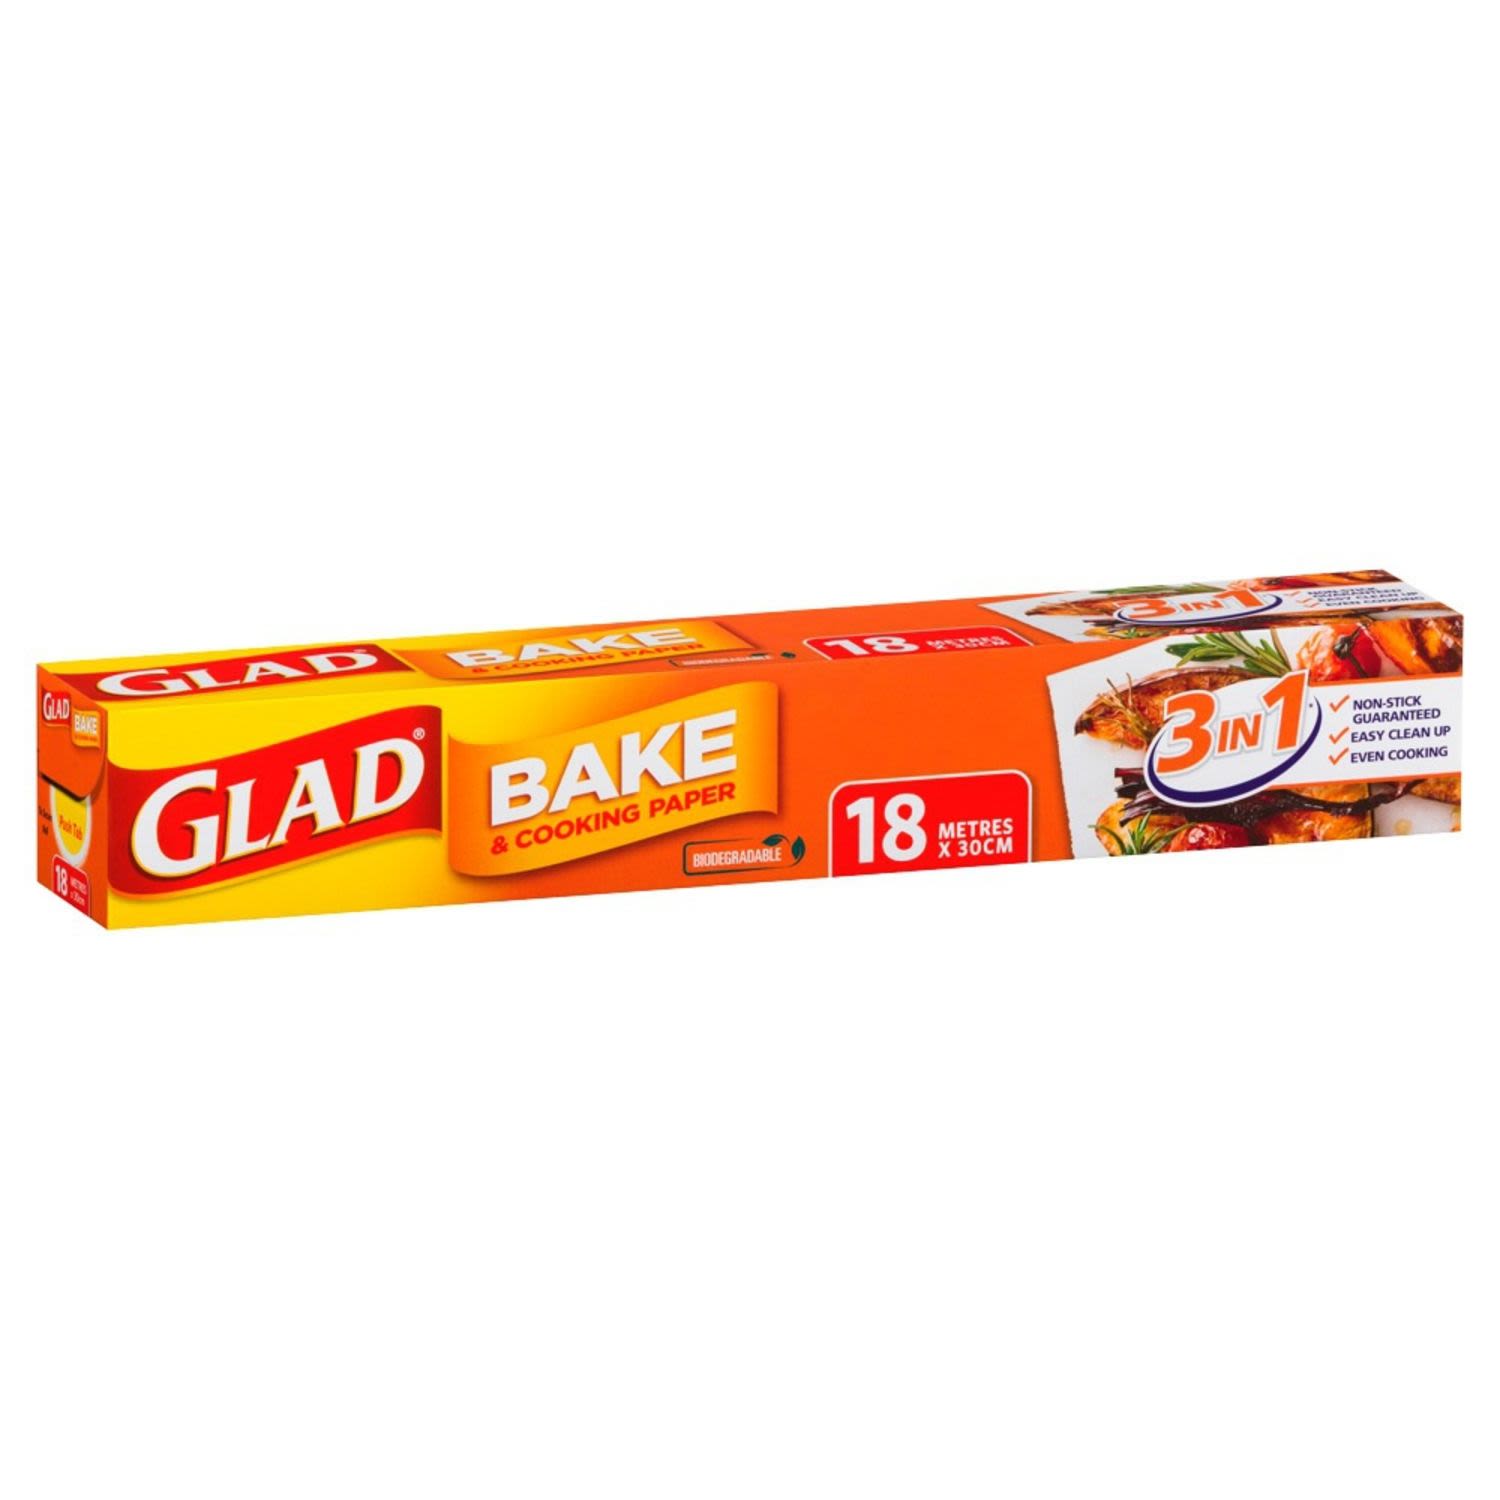 Glad Bake & Cooking Paper 18m, 1 Each